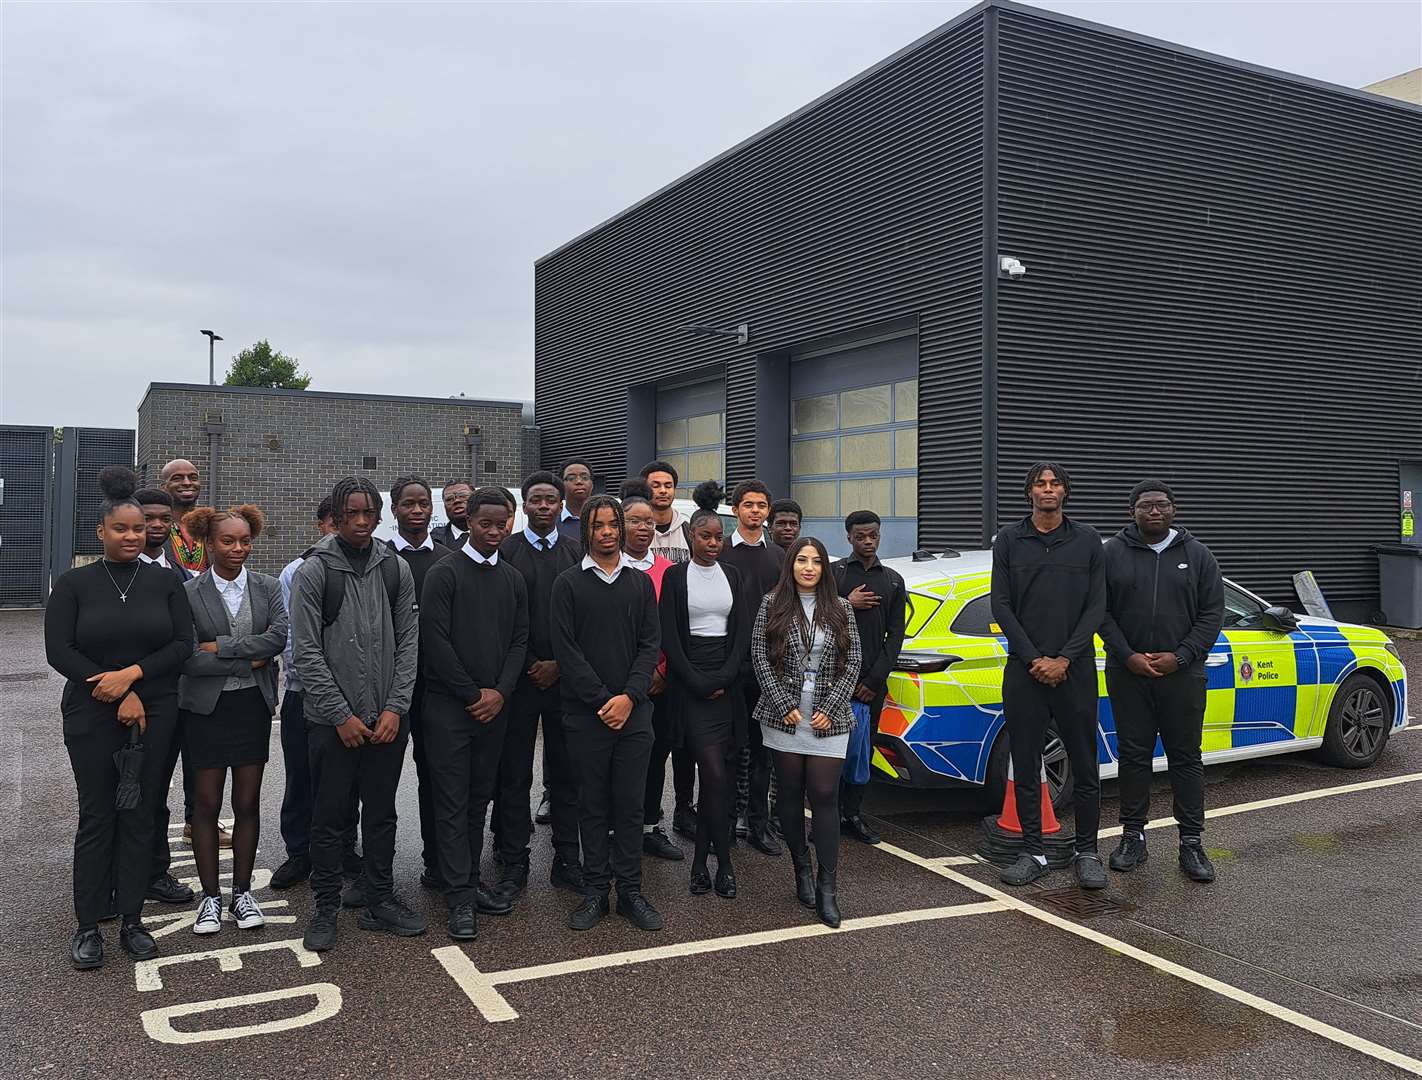 Pupils from St Thomas the Apostle School and Sixth Form College in Nunhead, Southbank University Academy and Haberdashers Aske Hatcham College on their visit to the Kent Police Station in Northfleet